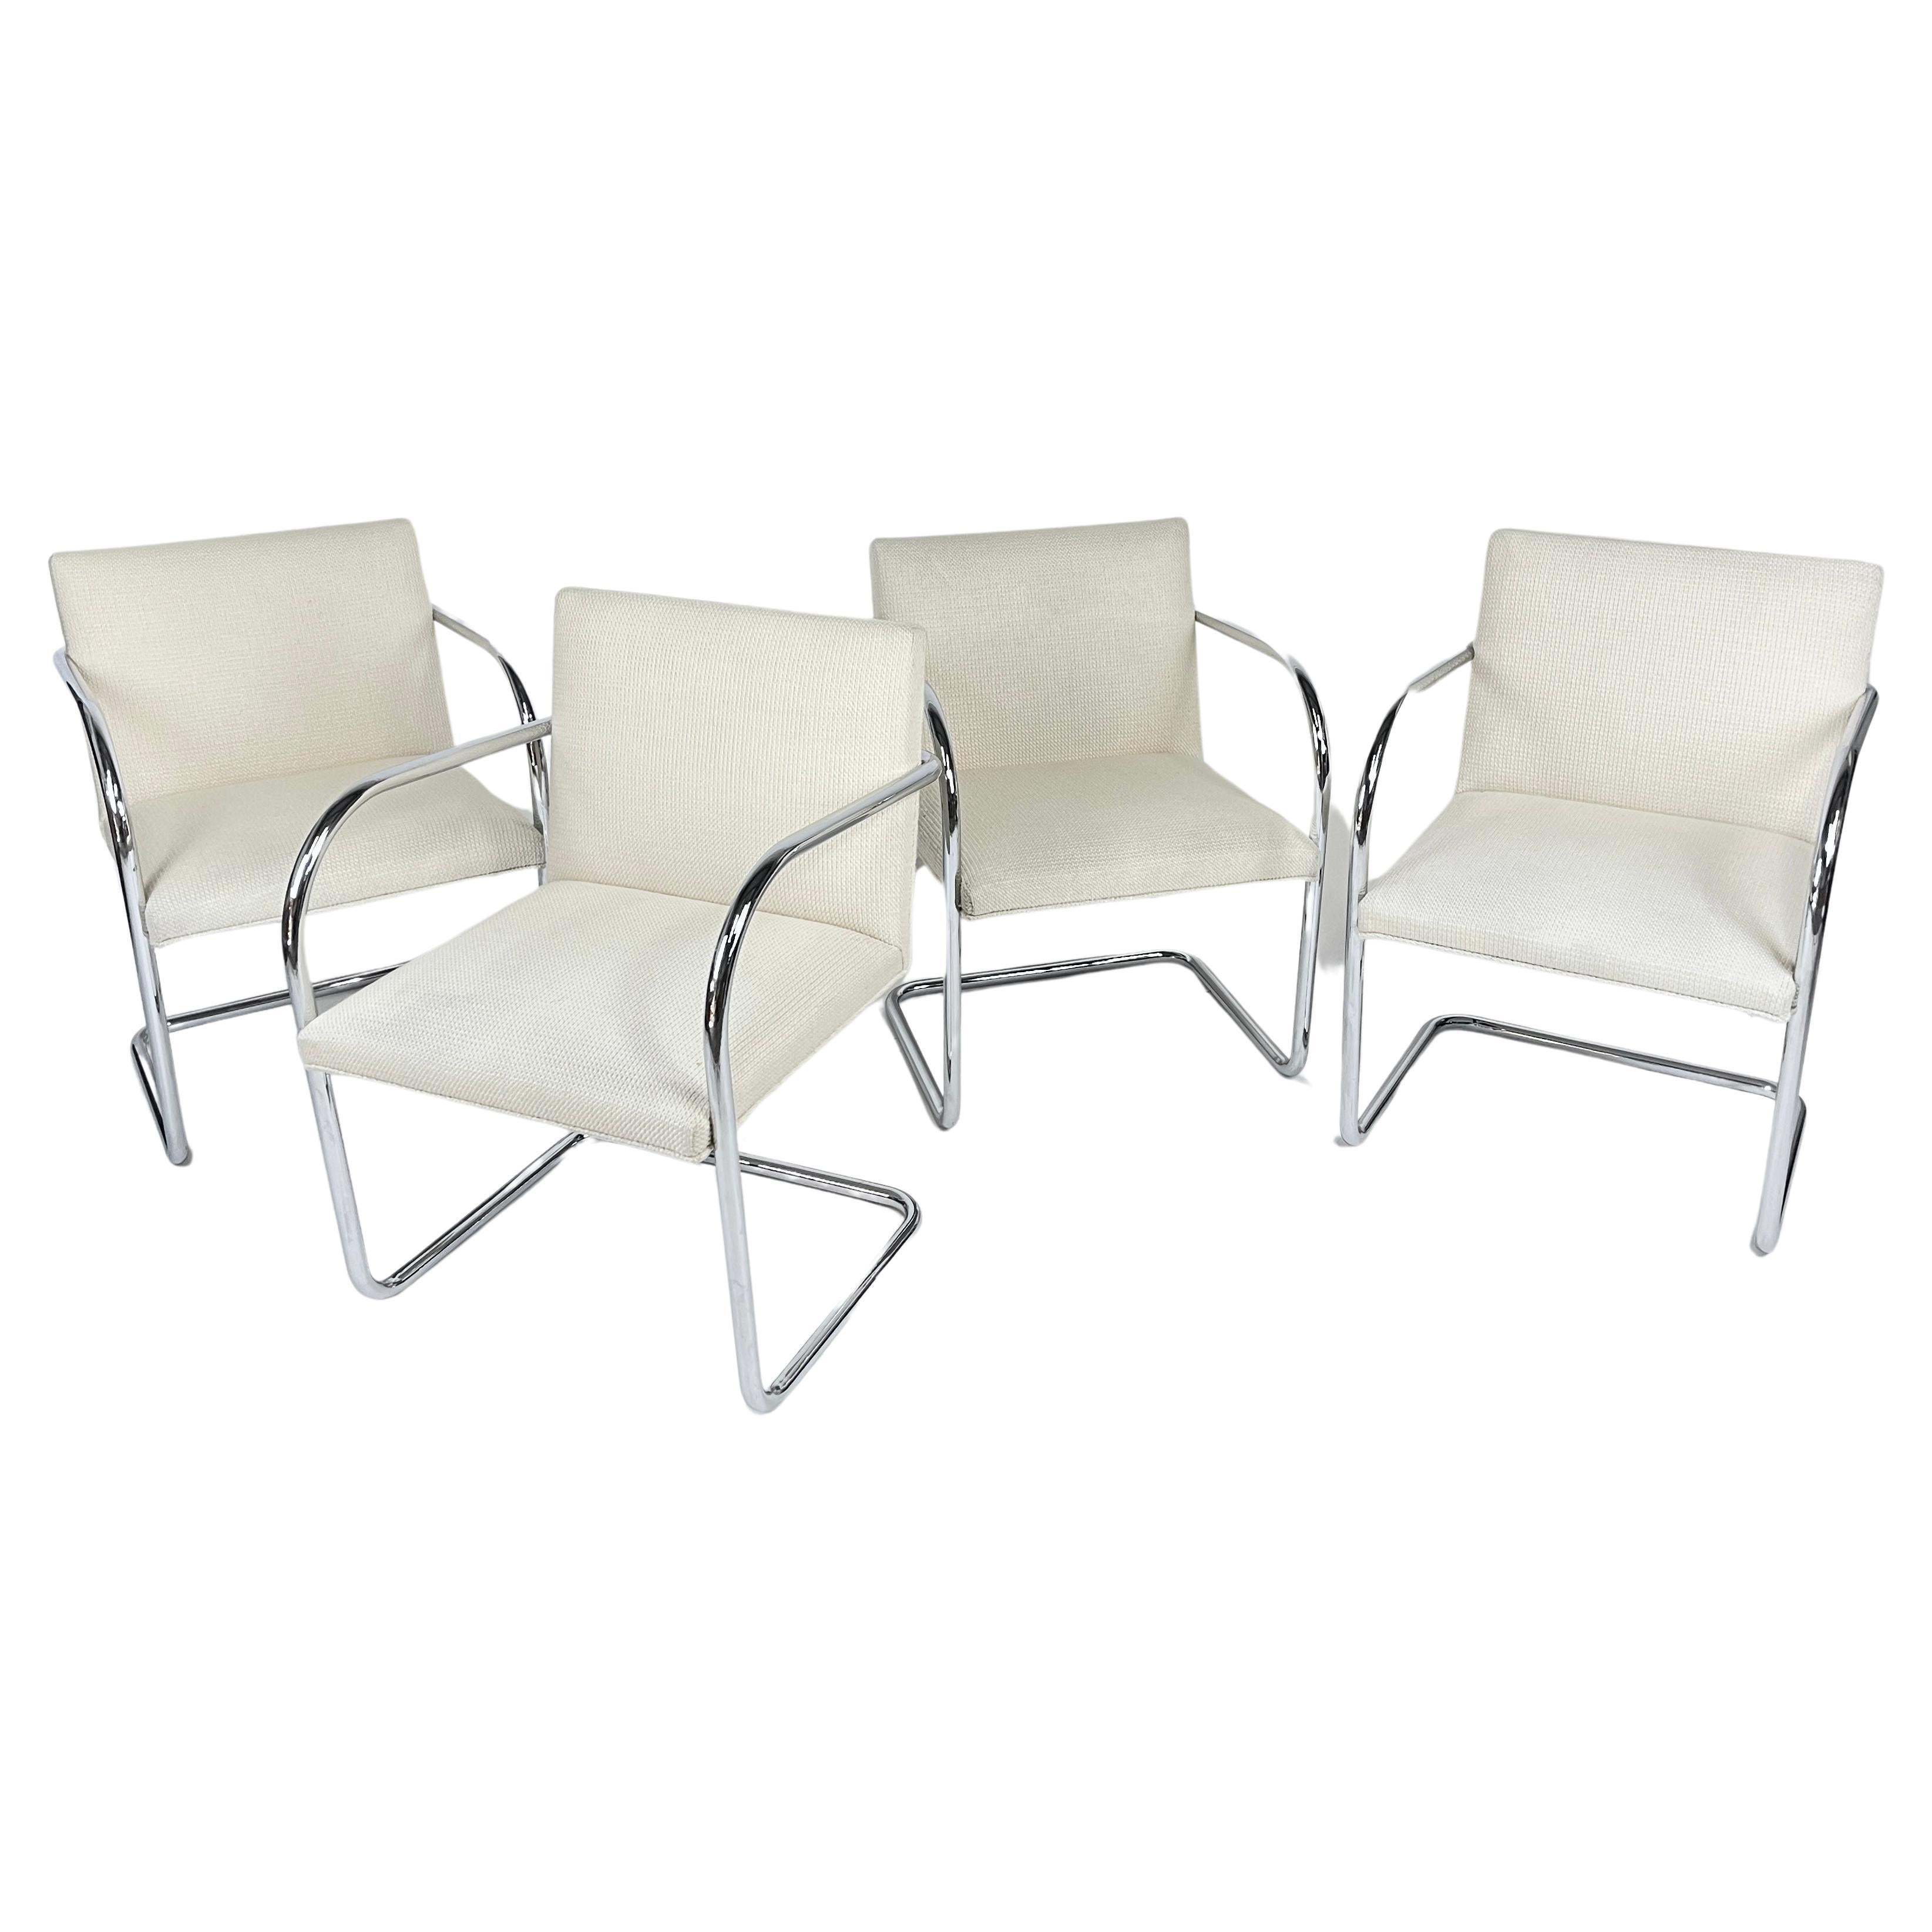 Set of 4 Mies Van Der Rohe for Knoll Brno Chairs in Cato Upholstery 60 available For Sale